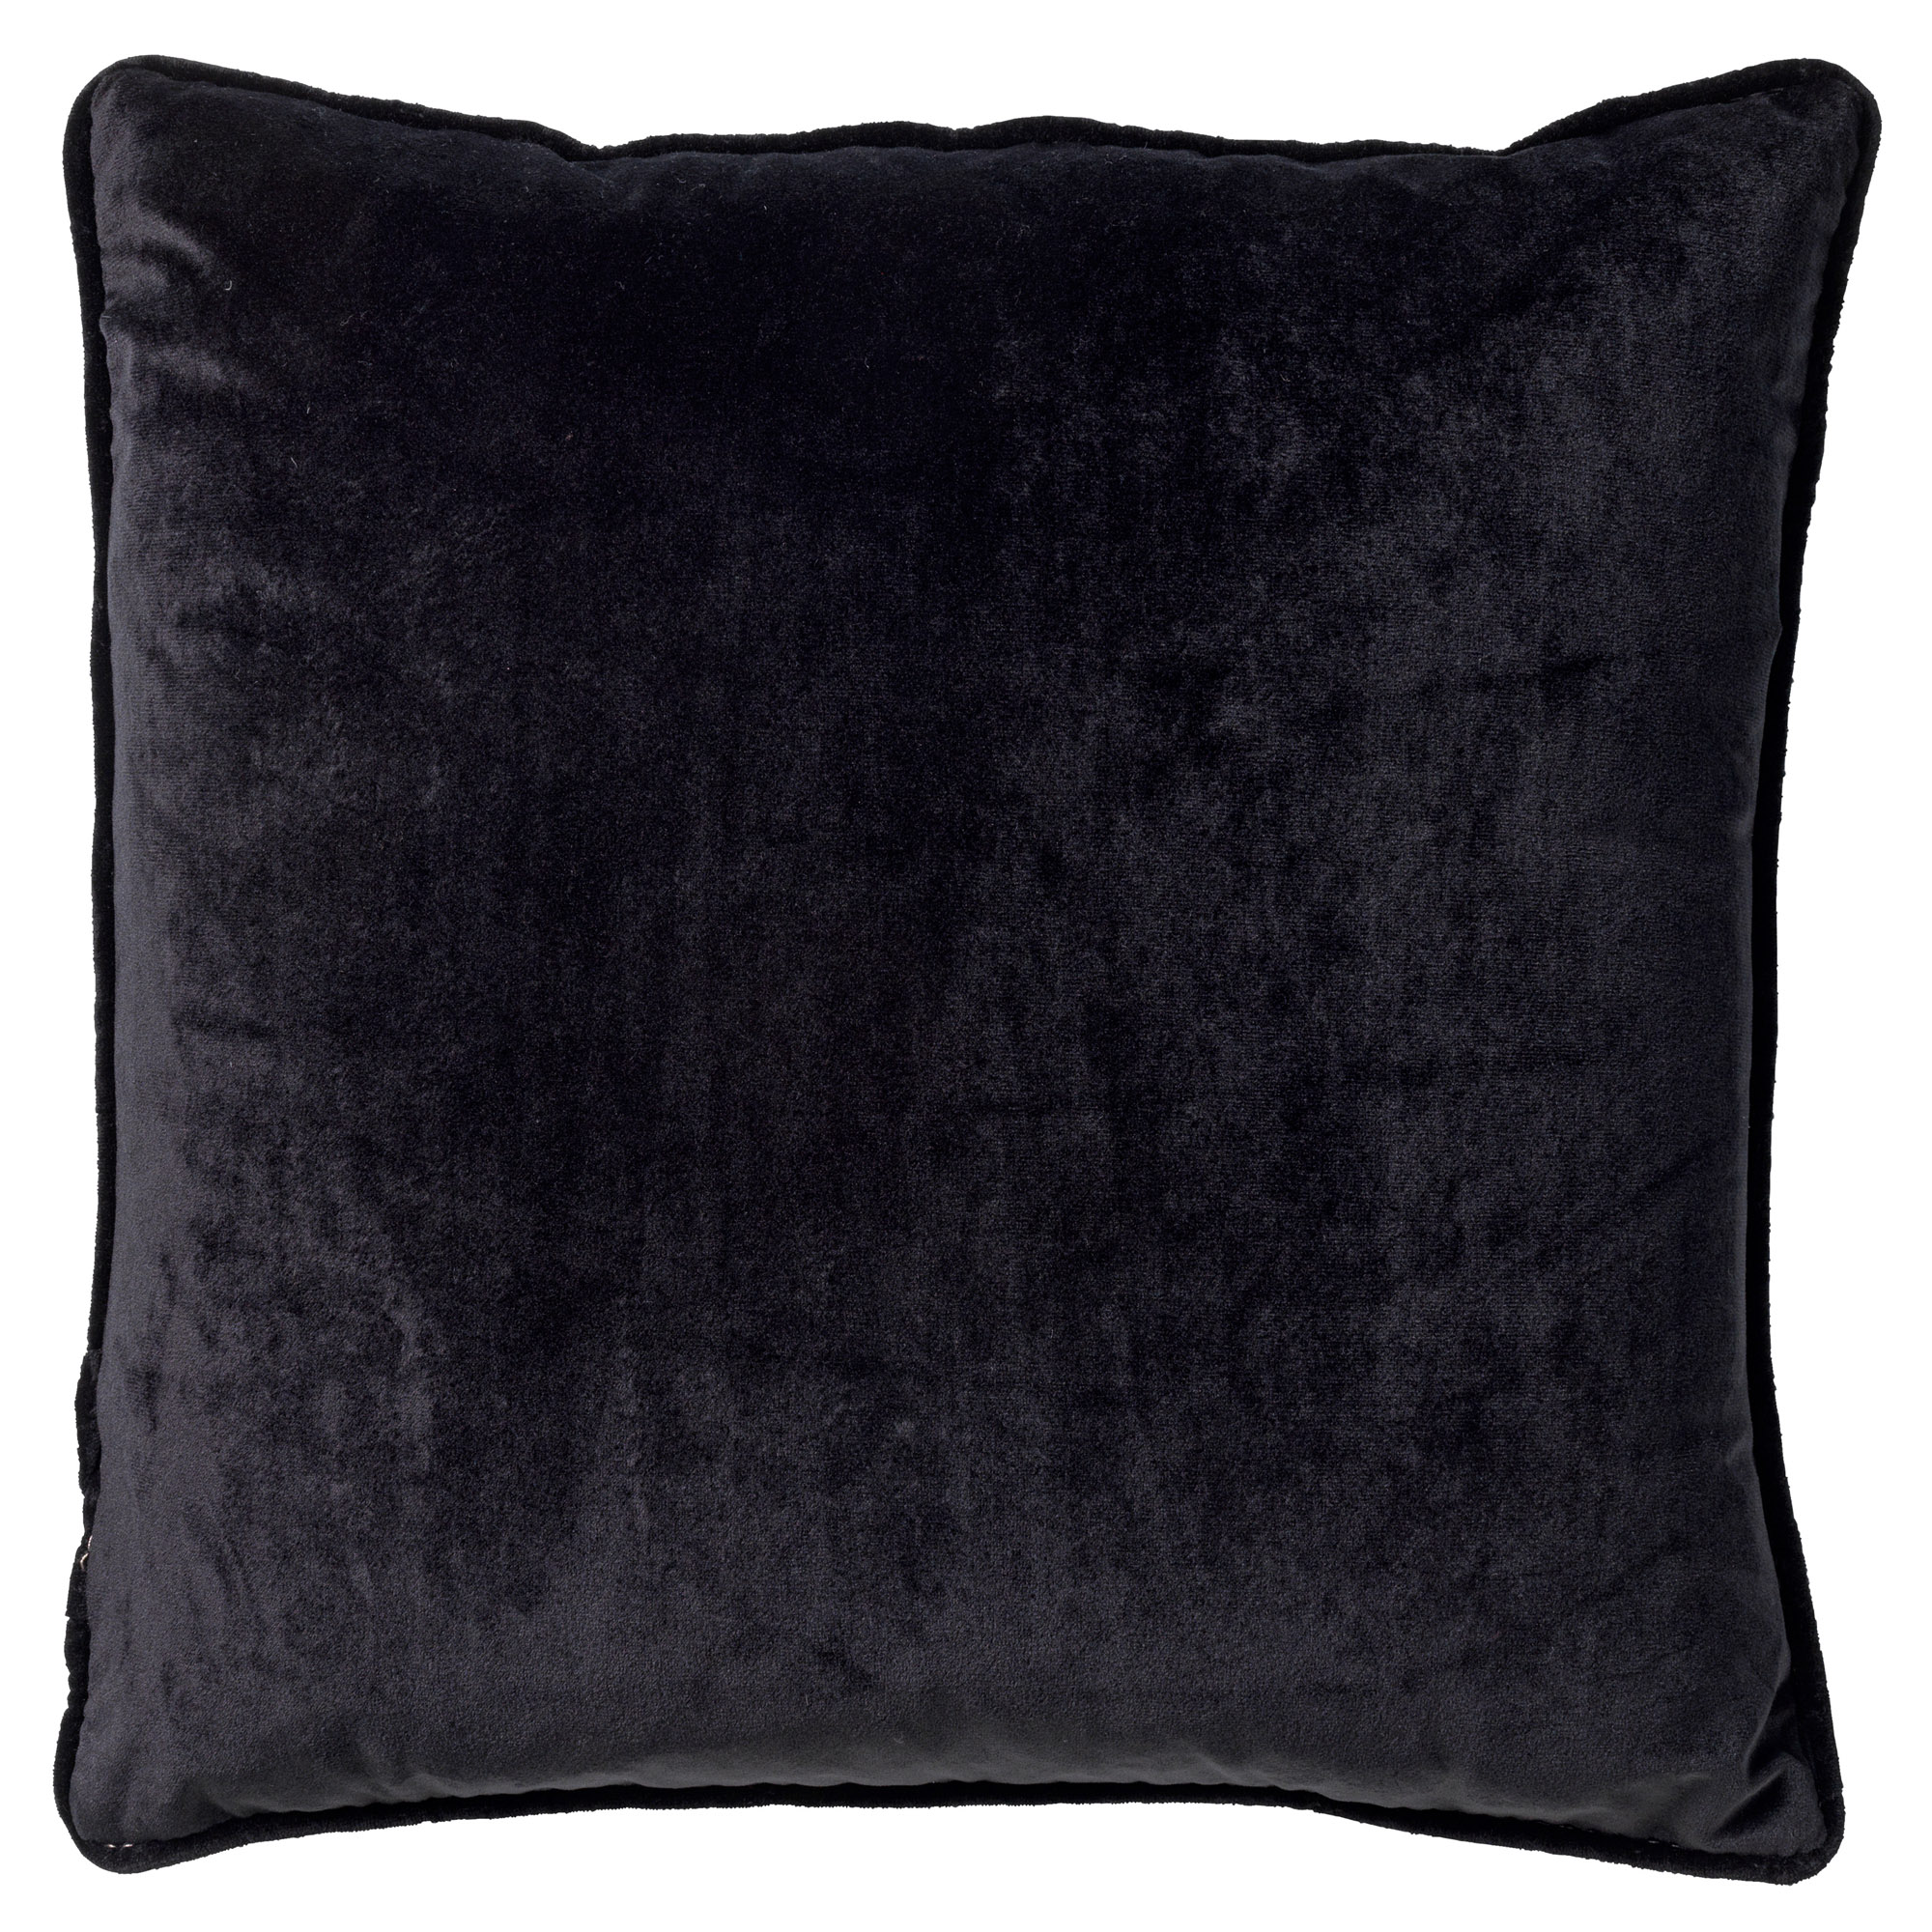 FINNA - Kussenhoes 45x45 cm 100% gerecycled polyester - Eco Line collectie - Raven - zwart